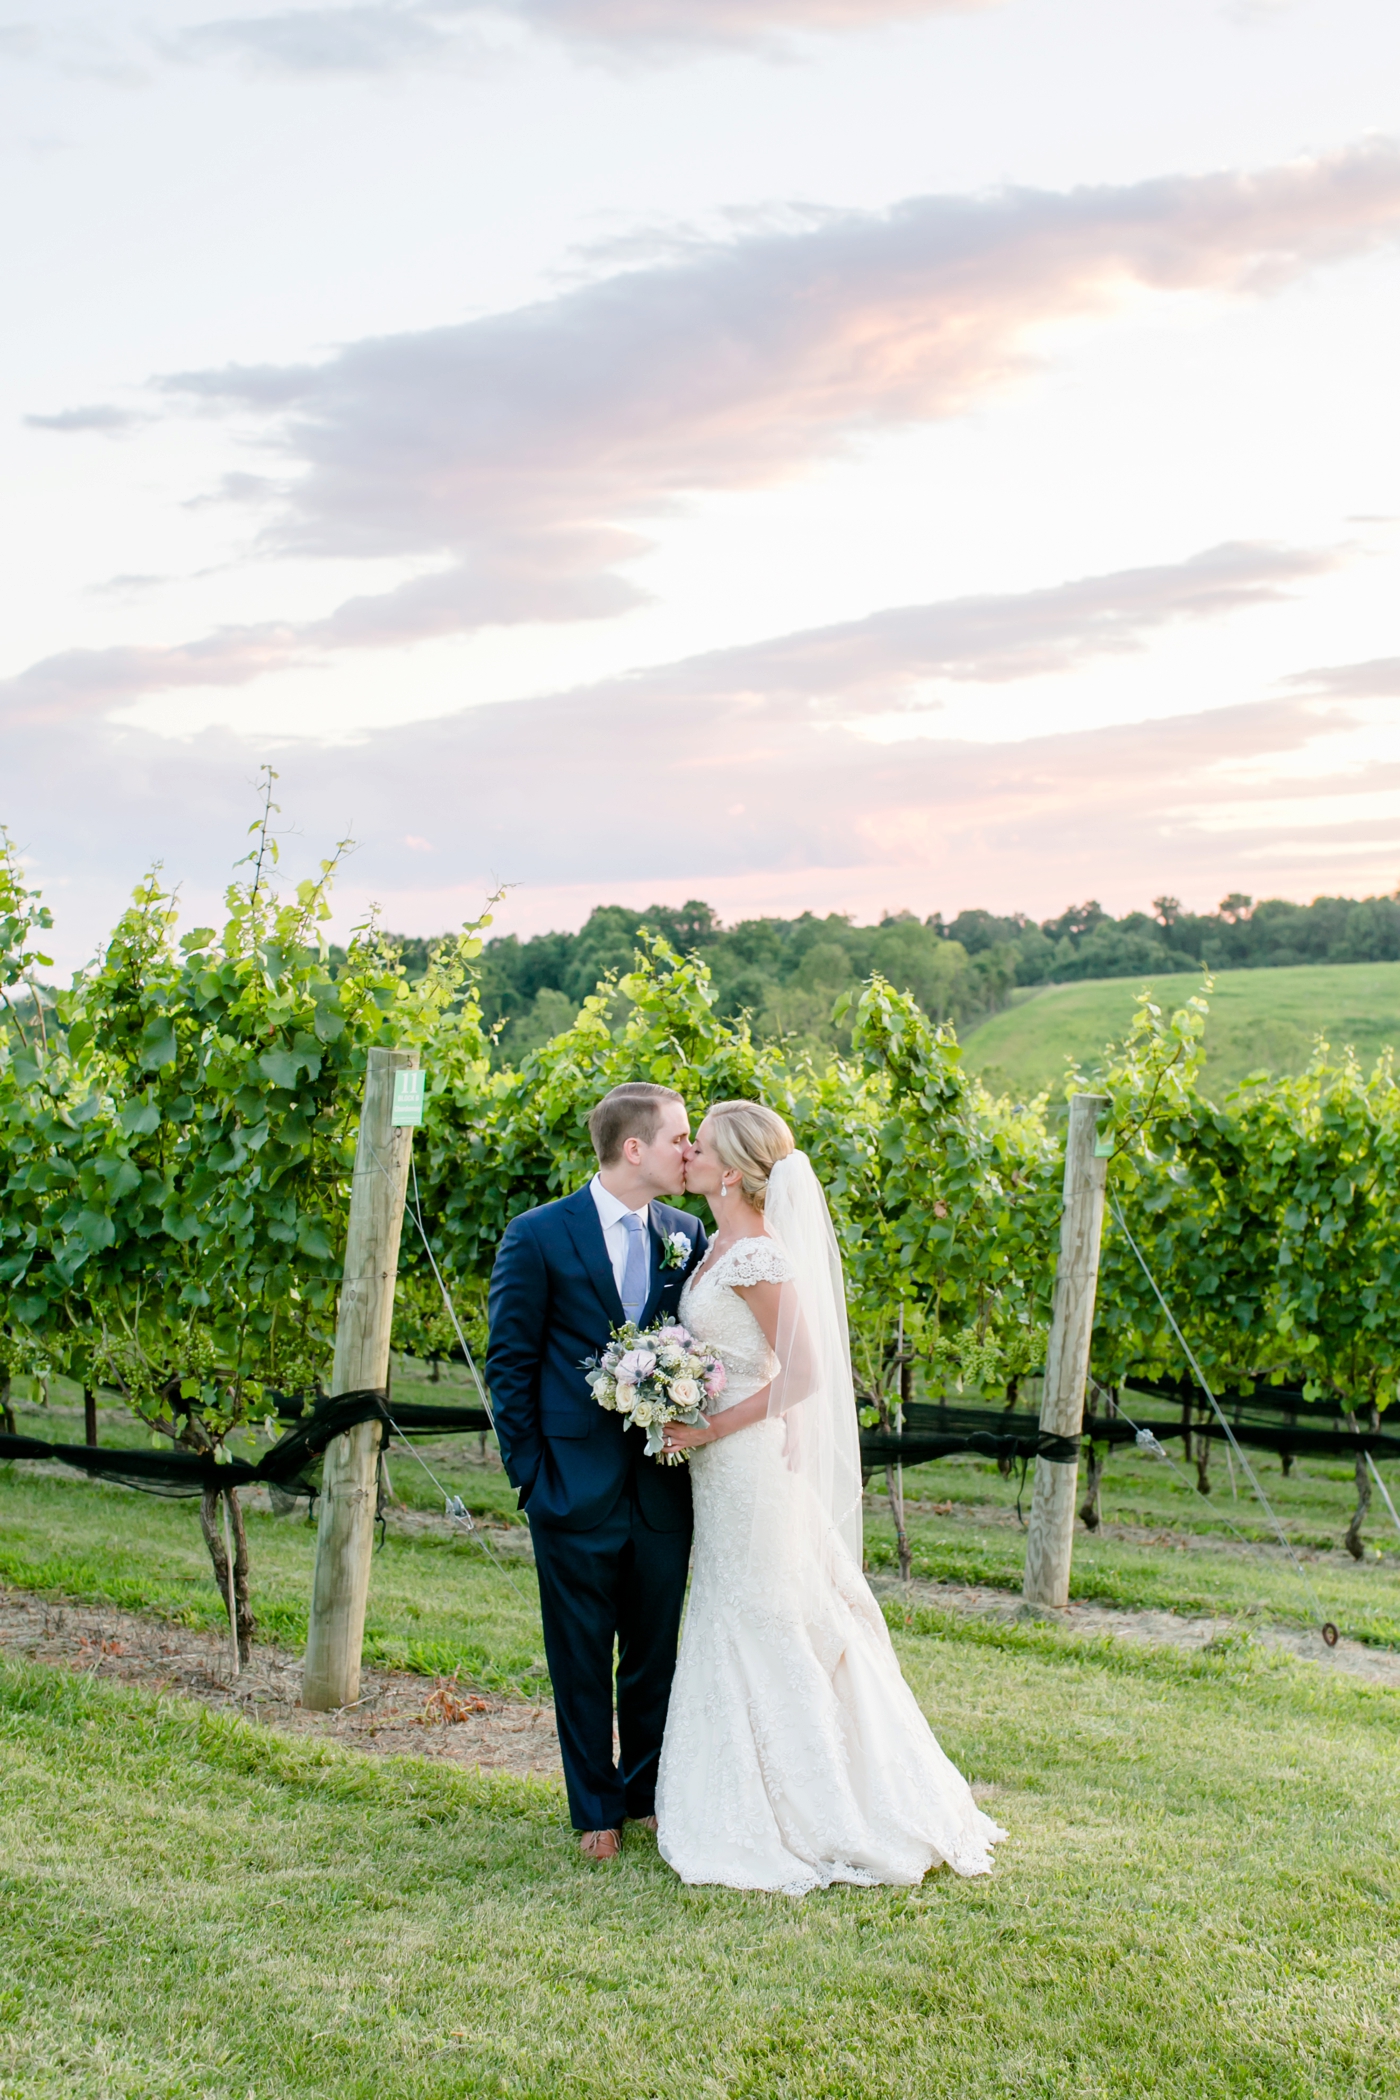 54A-Stone-Tower-Winery-Summer-Wedding-GG-1202